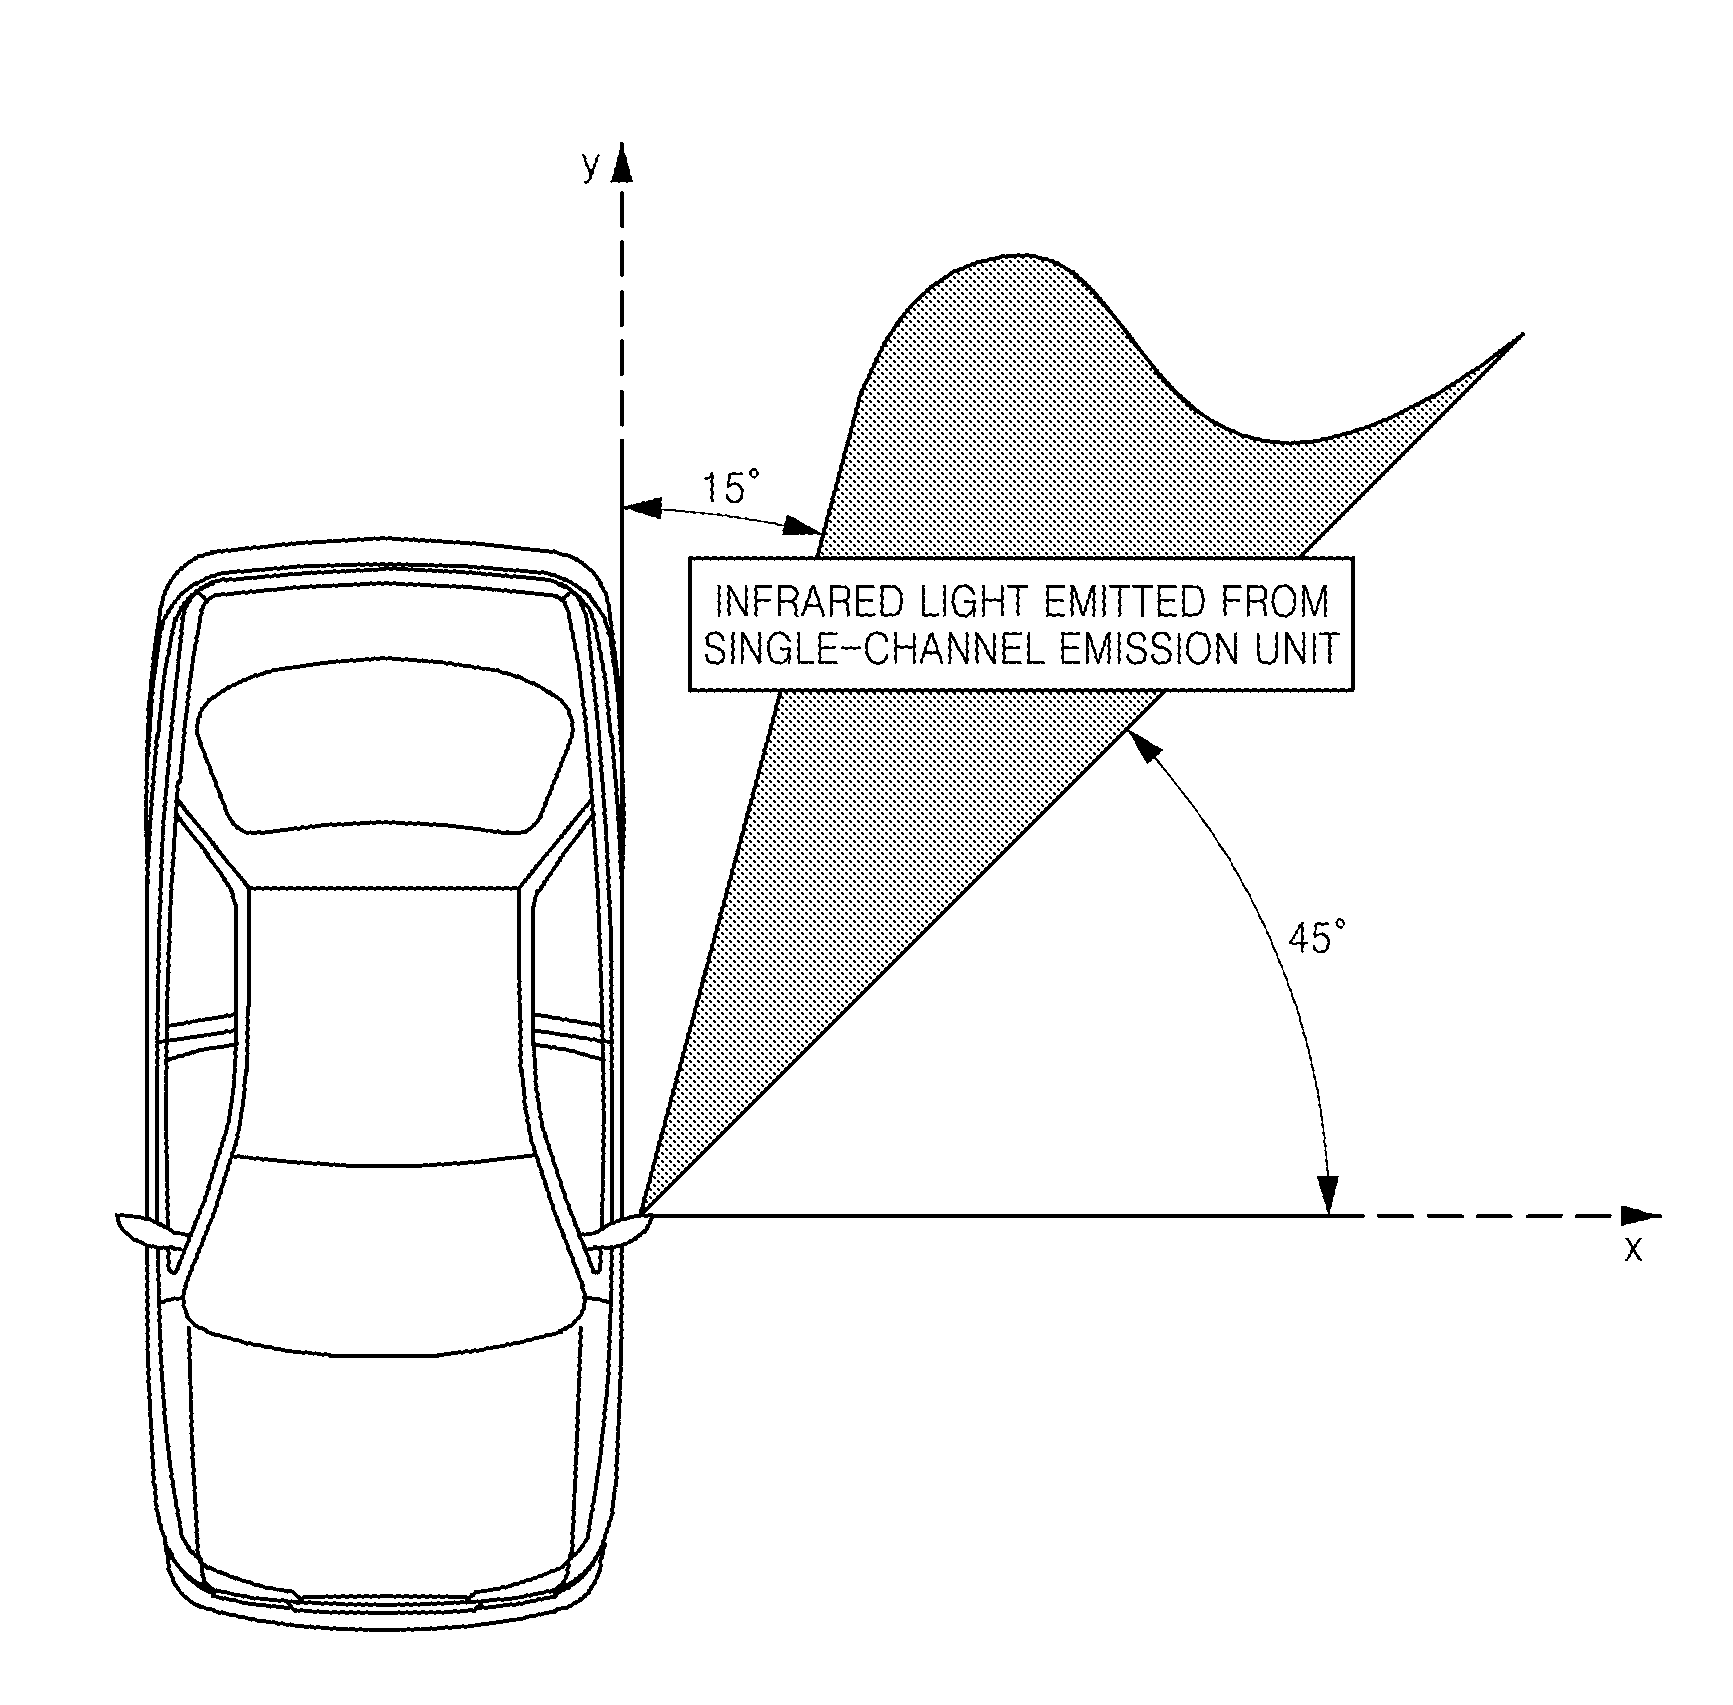 Collision avoidance system based on detection of obstacles in blind spots of vehicle